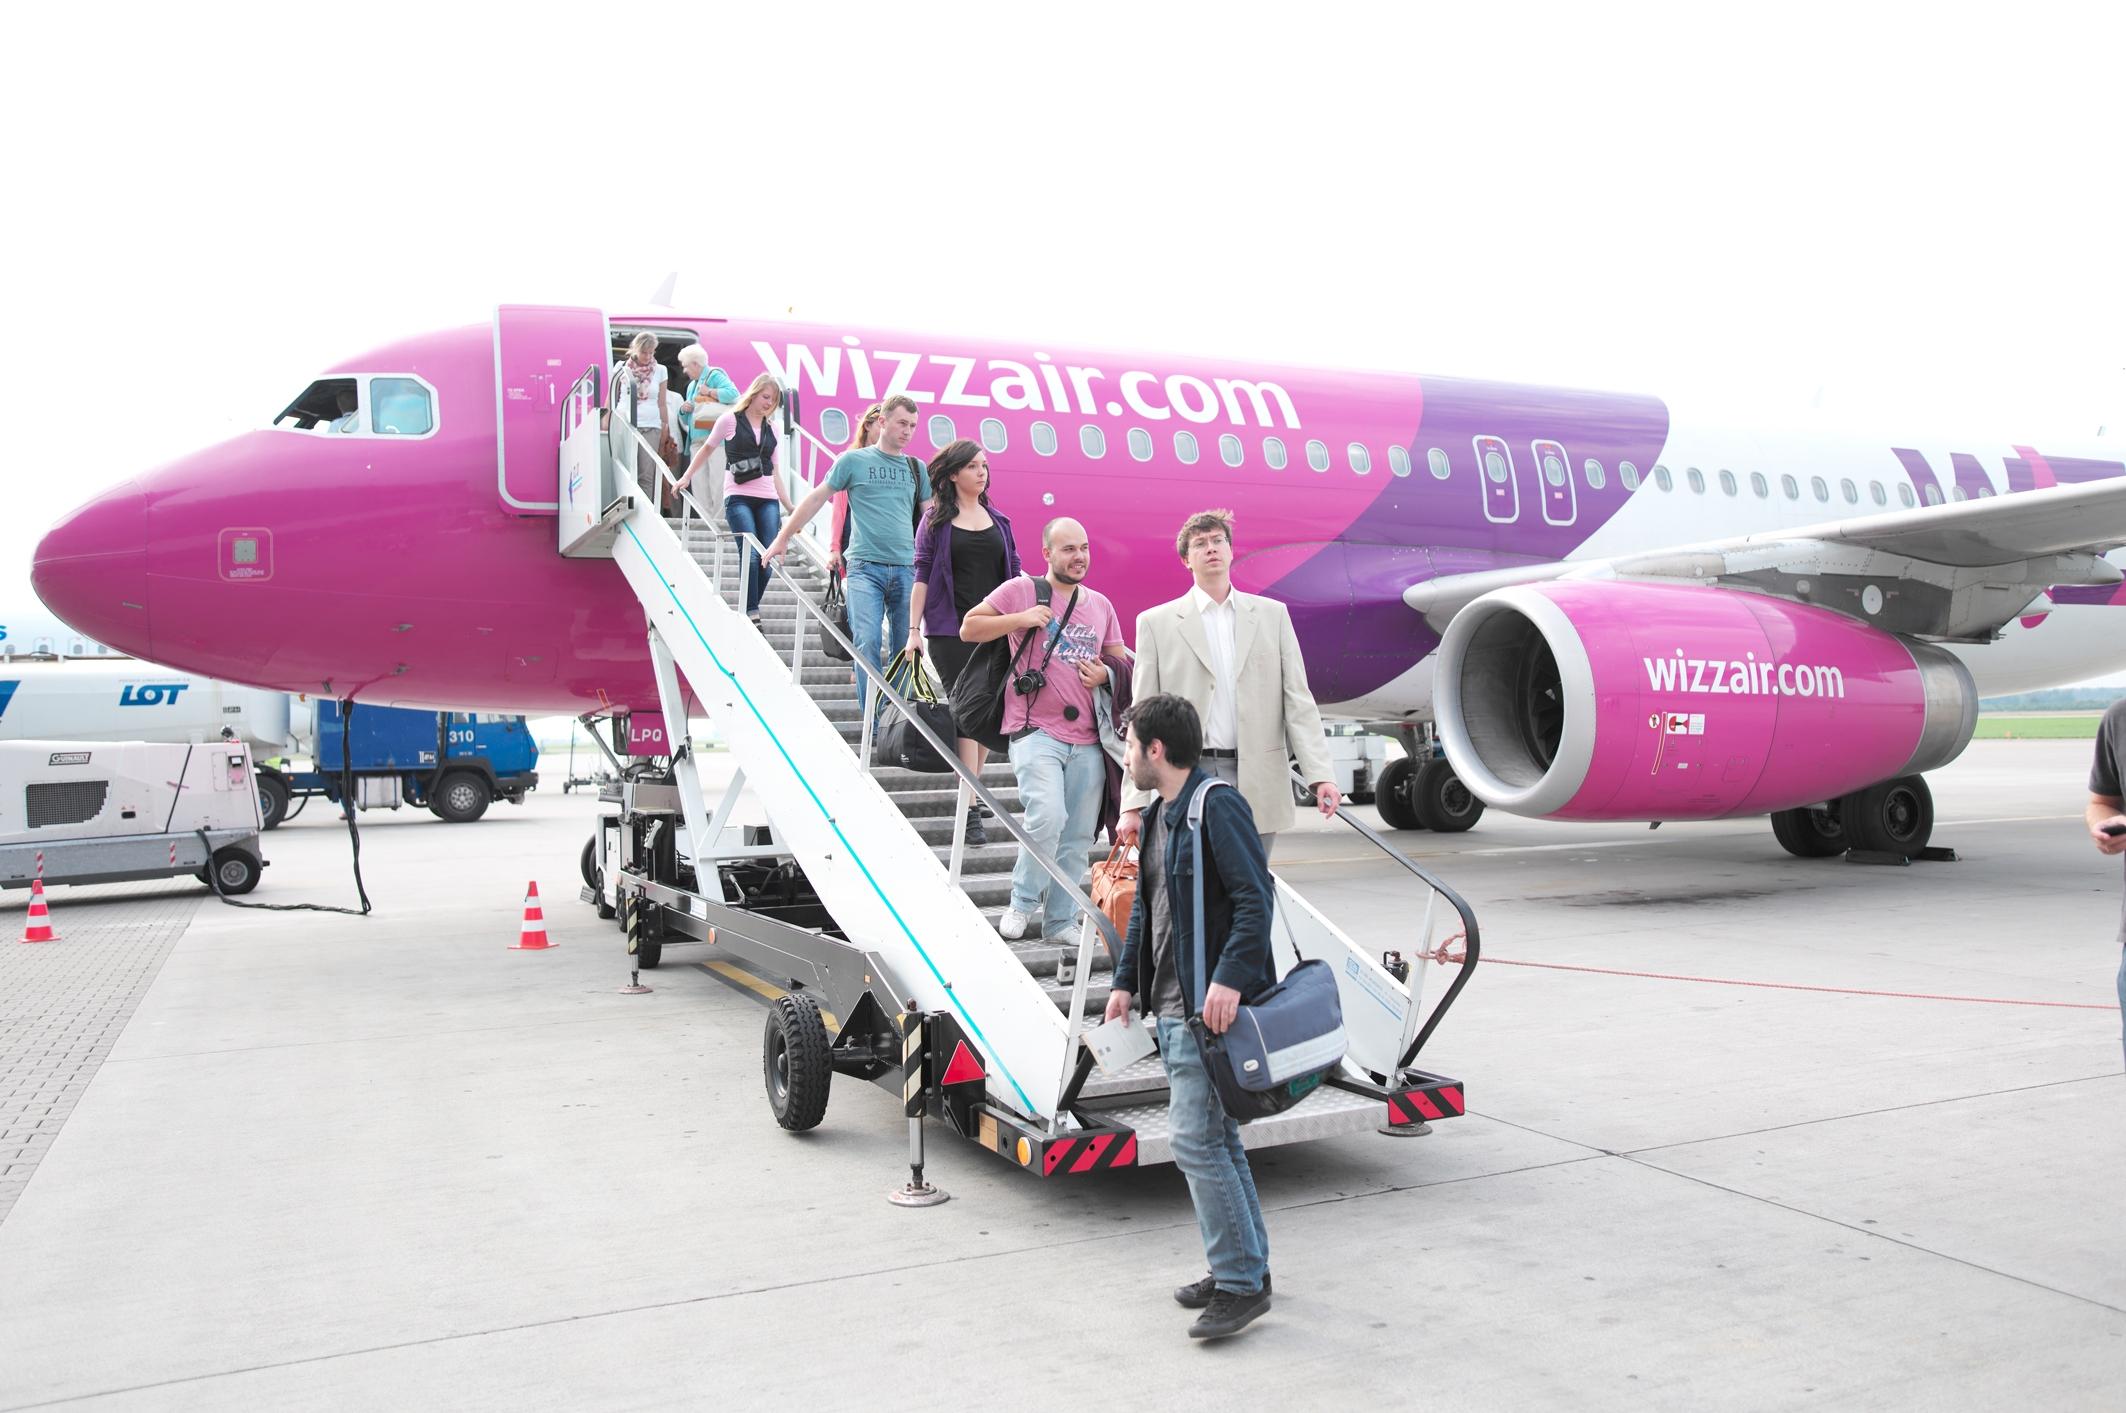 Wizz Air Improves Boarding Experience